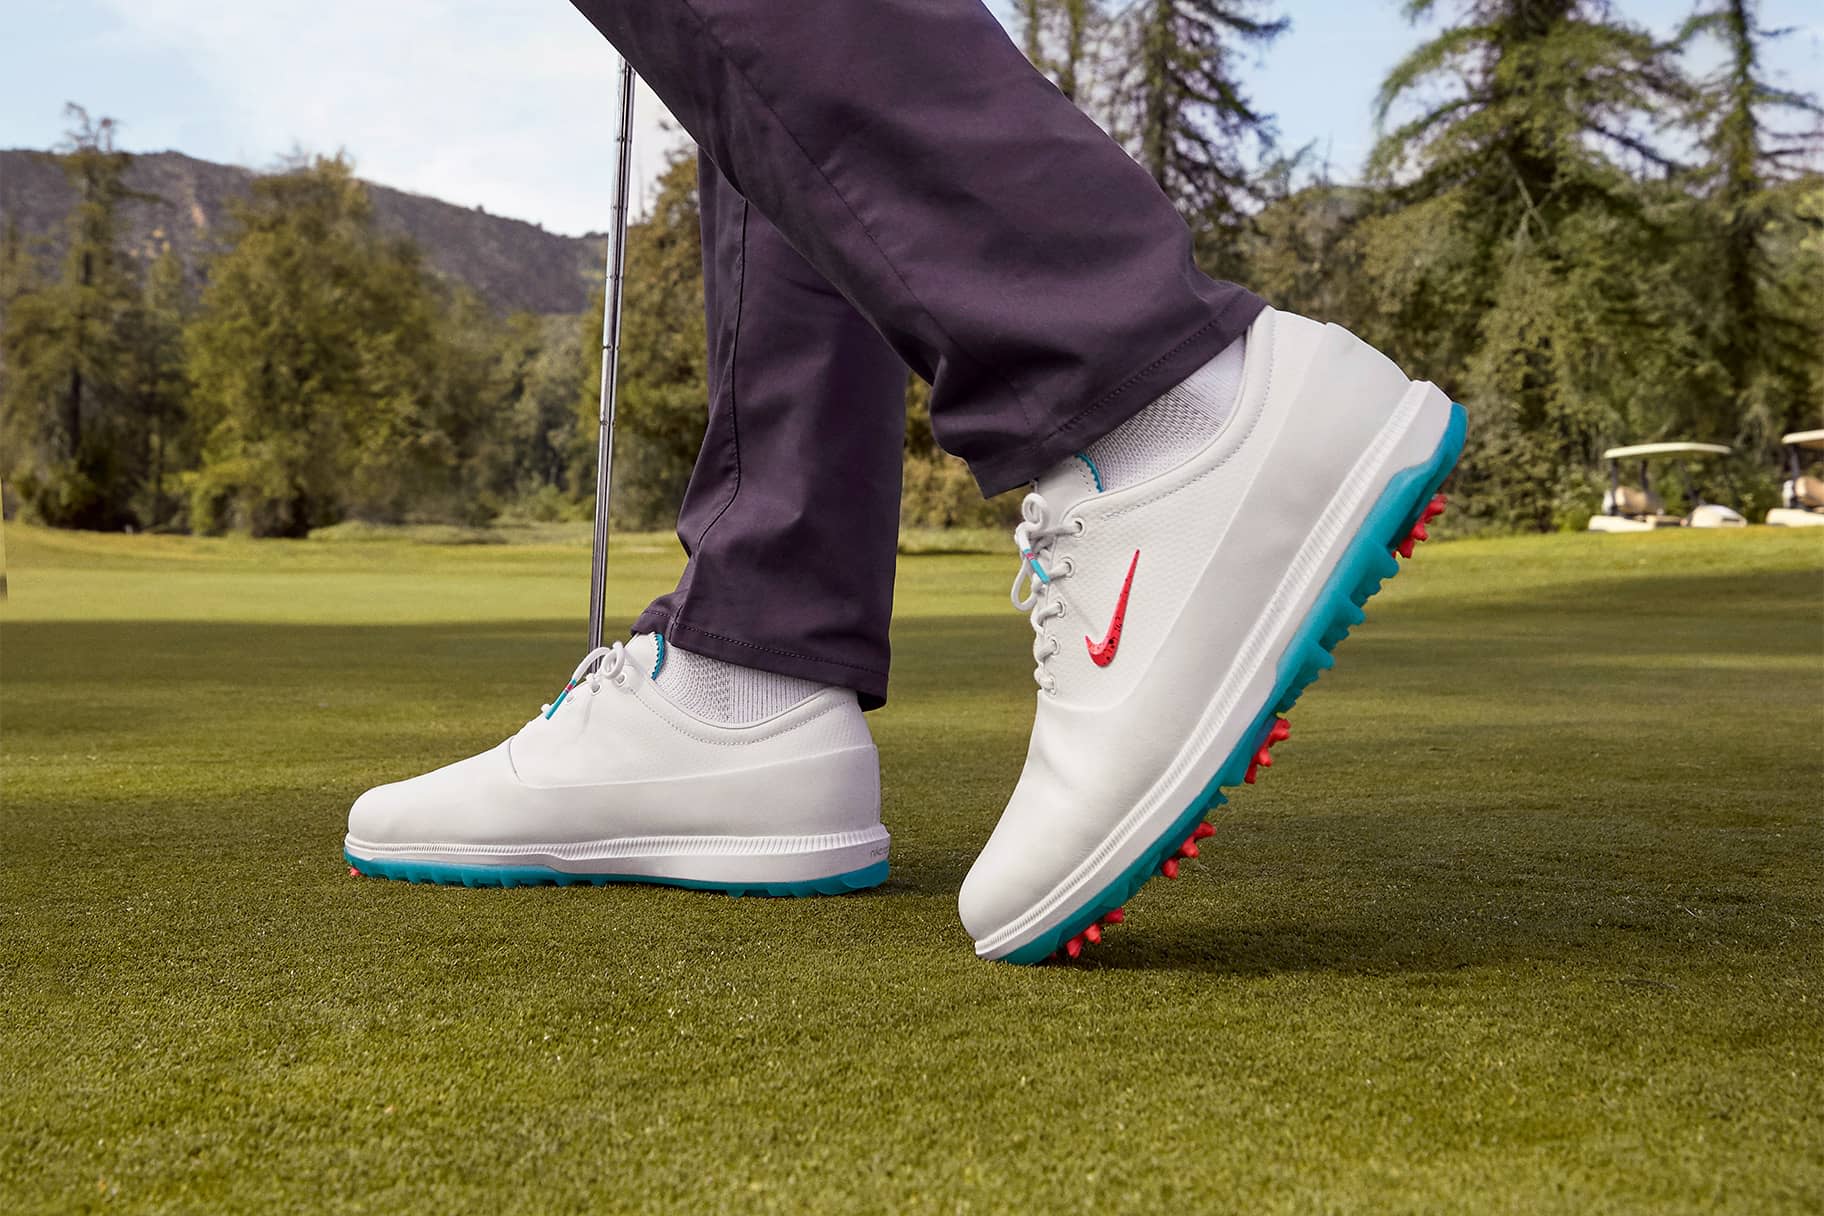 sfærisk Sweeten svinekød Nike's Best Golf Shoes for Traction, Stability and Comfort. Nike.com